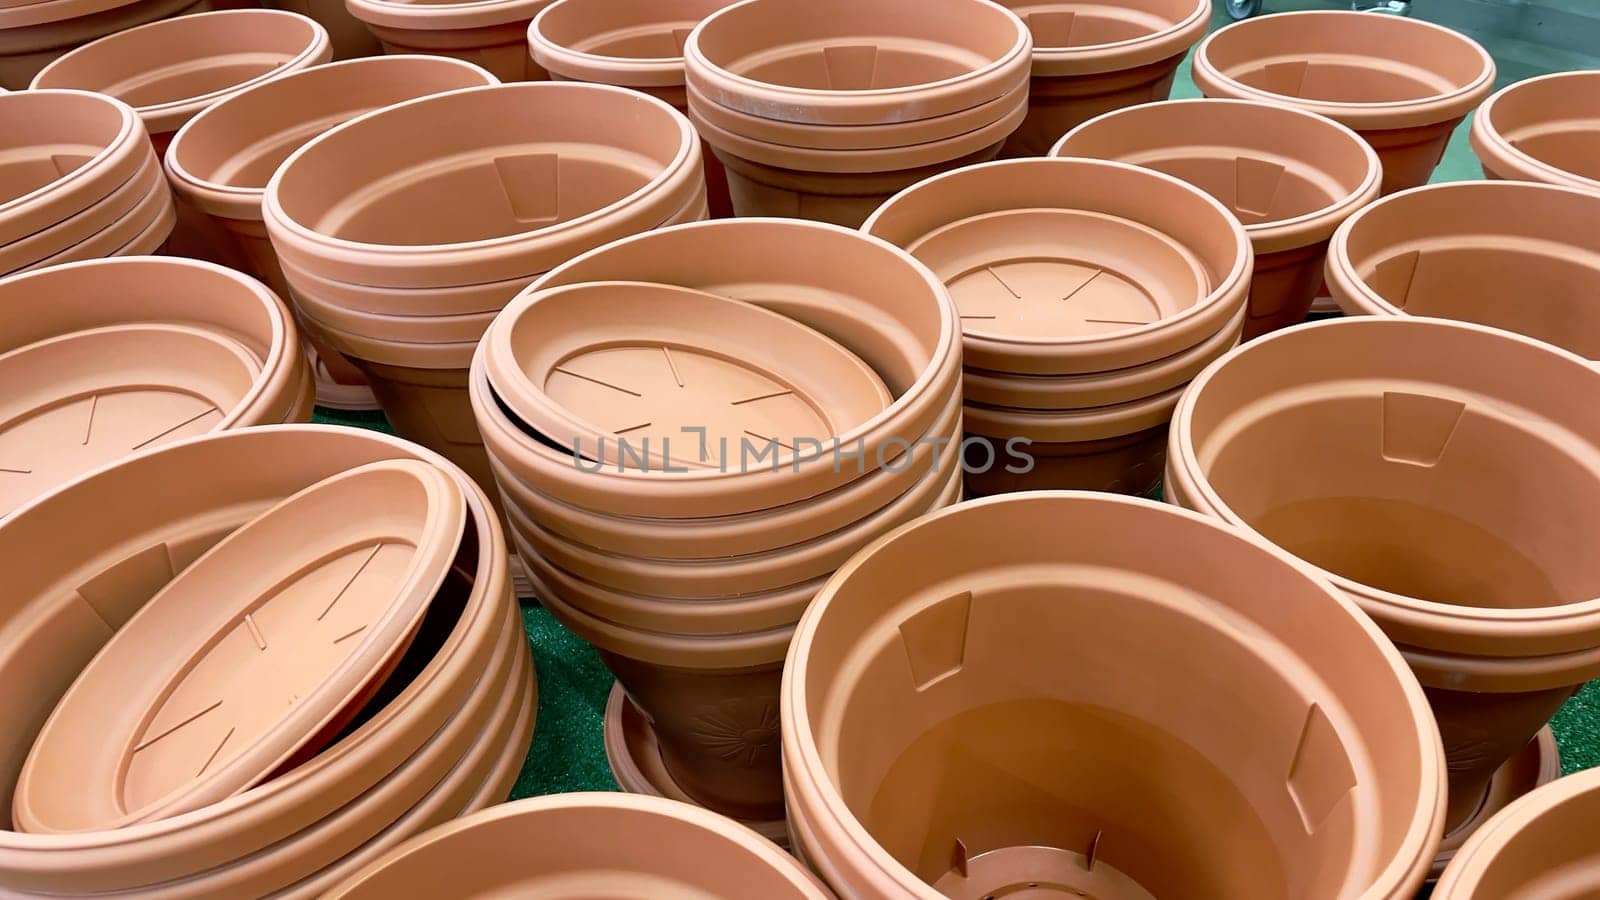 Close-up of empty flower pots in a store or greenhouse. Colorful pots for plants. Gardening and landscape design concept by Matiunina